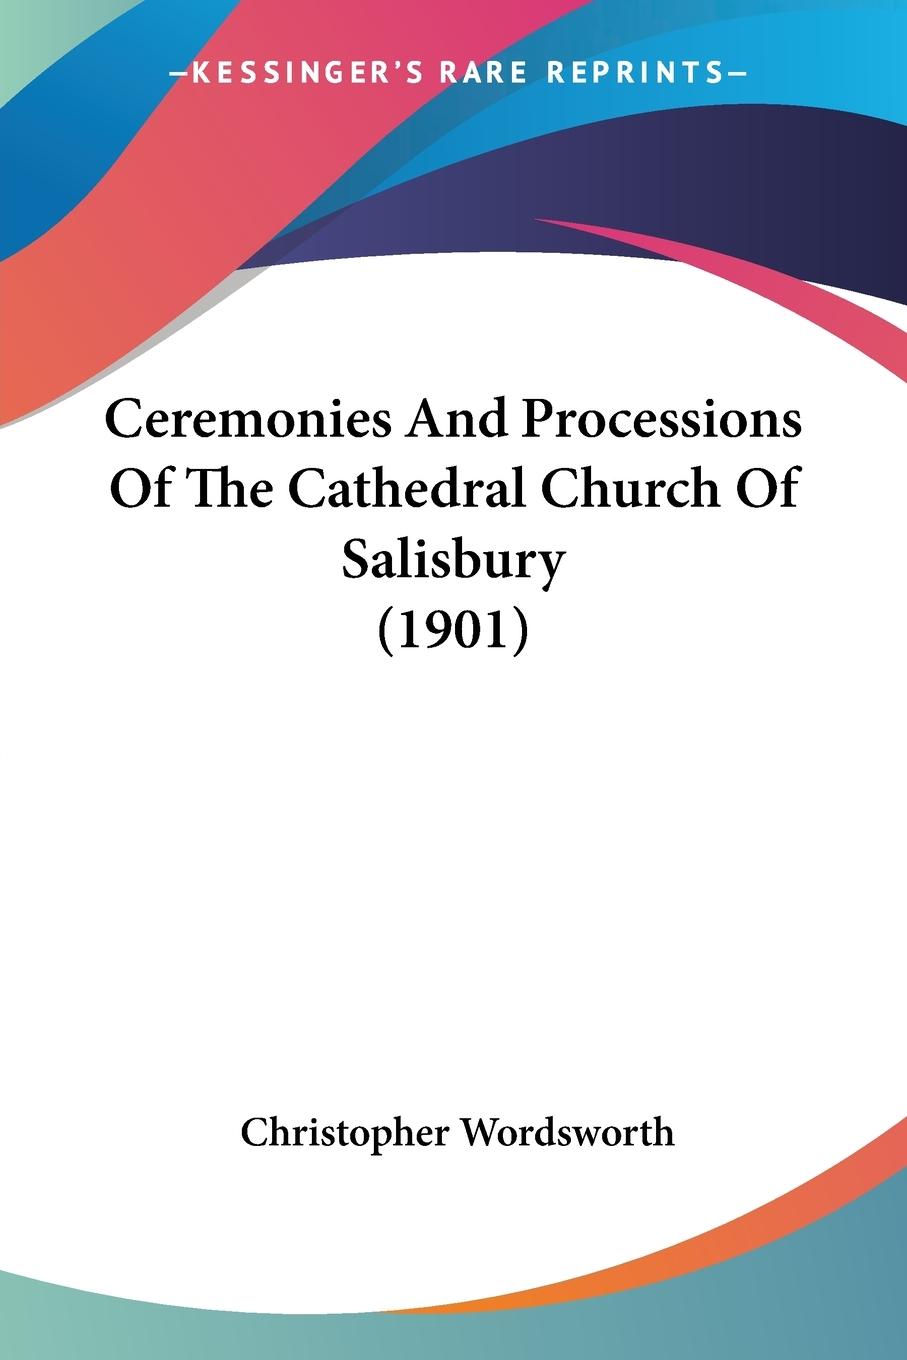 Ceremonies And Processions Of The Cathedral Church Of Salisbury (1901)